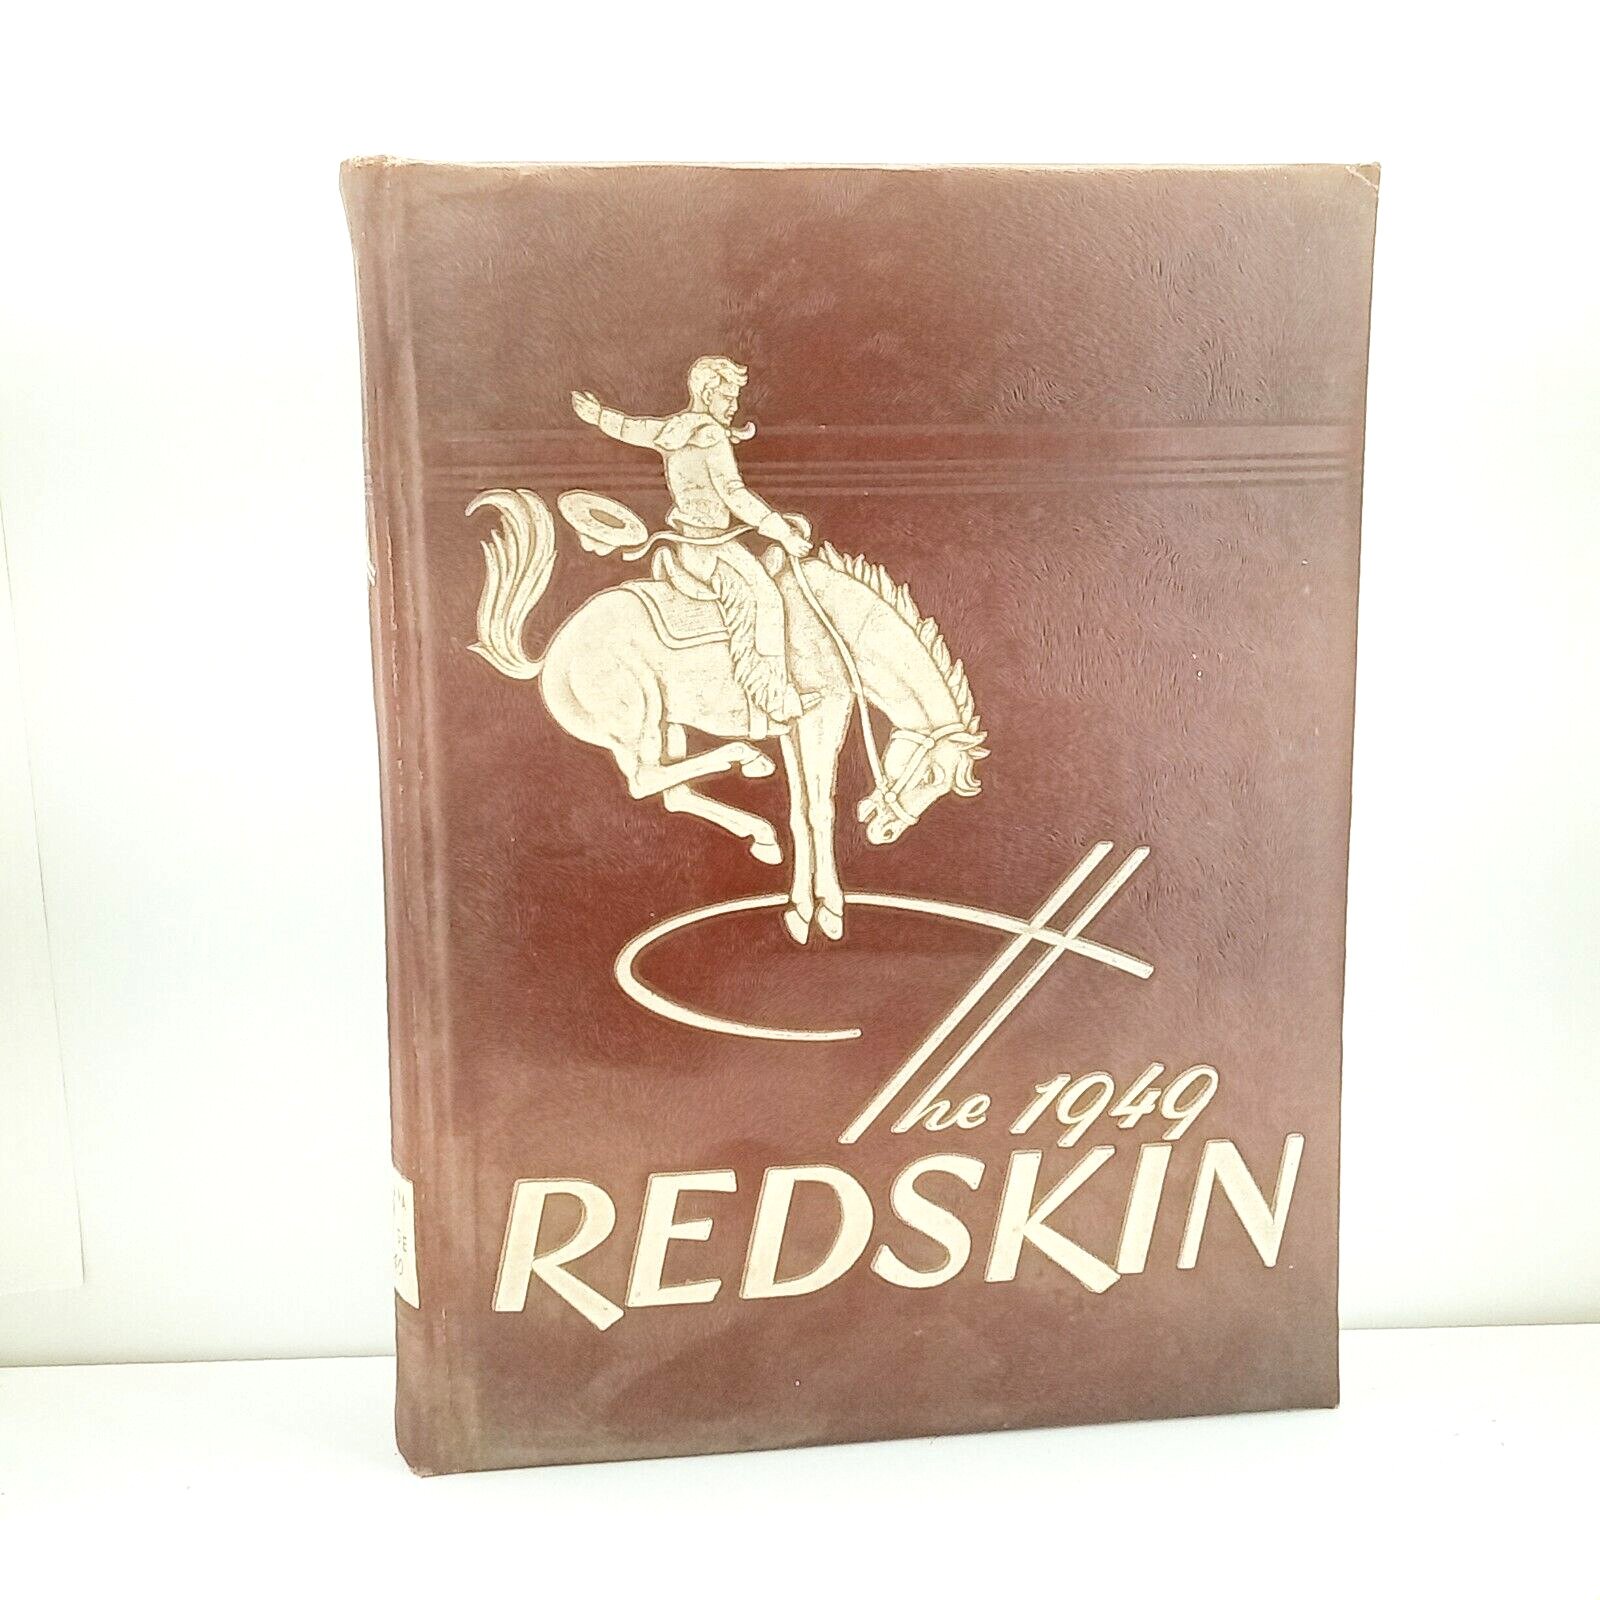 Oklahoma A&M University 1949 Yearbook The Redskin Hardcover